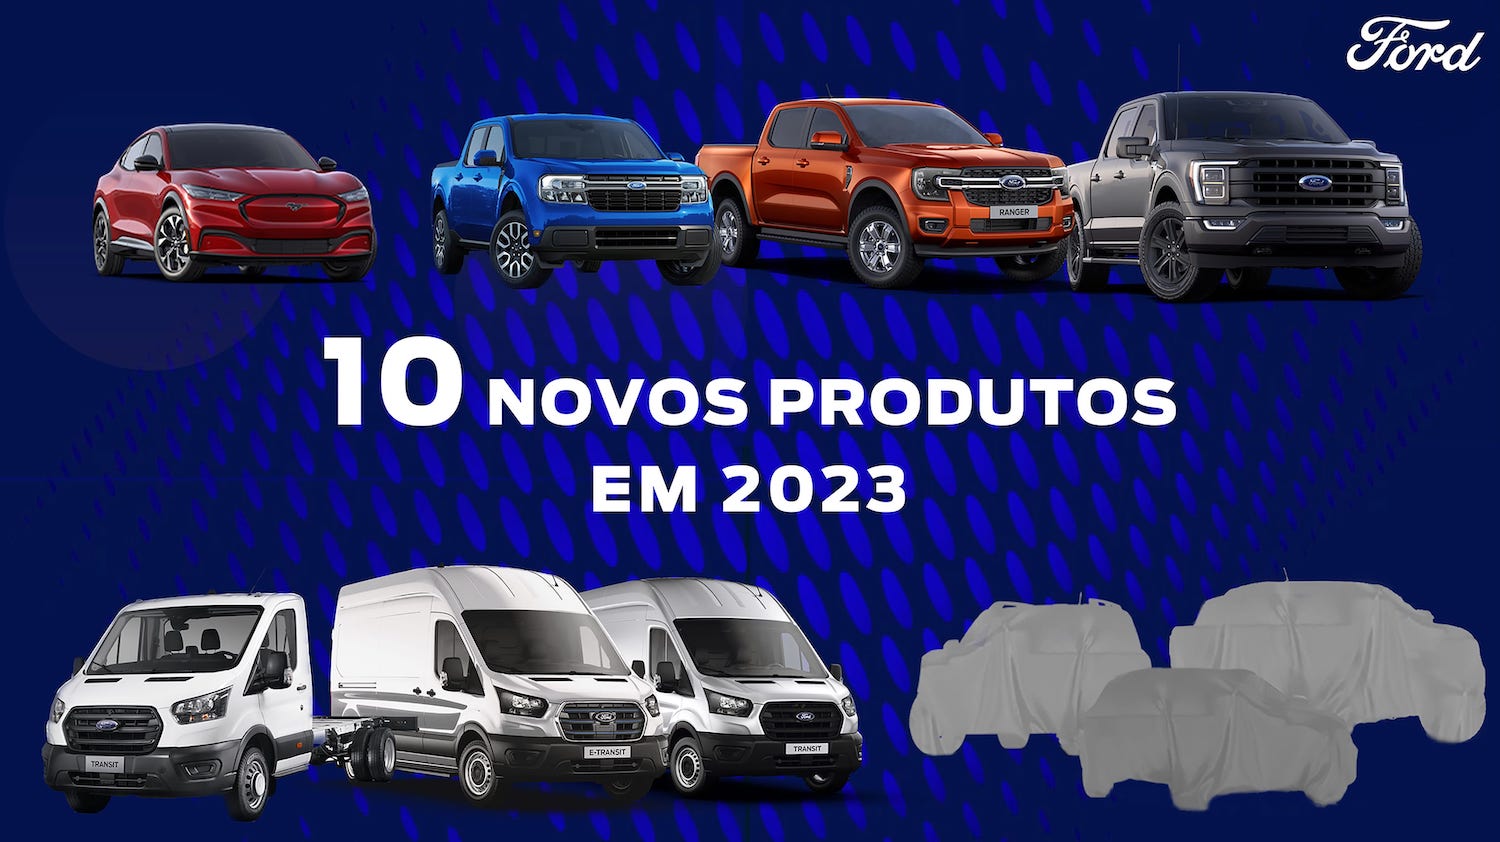 https://fordauthority.com/wp-content/uploads/2022/12/Ford-Brazil-Revamped-Lineup-2023.jpg